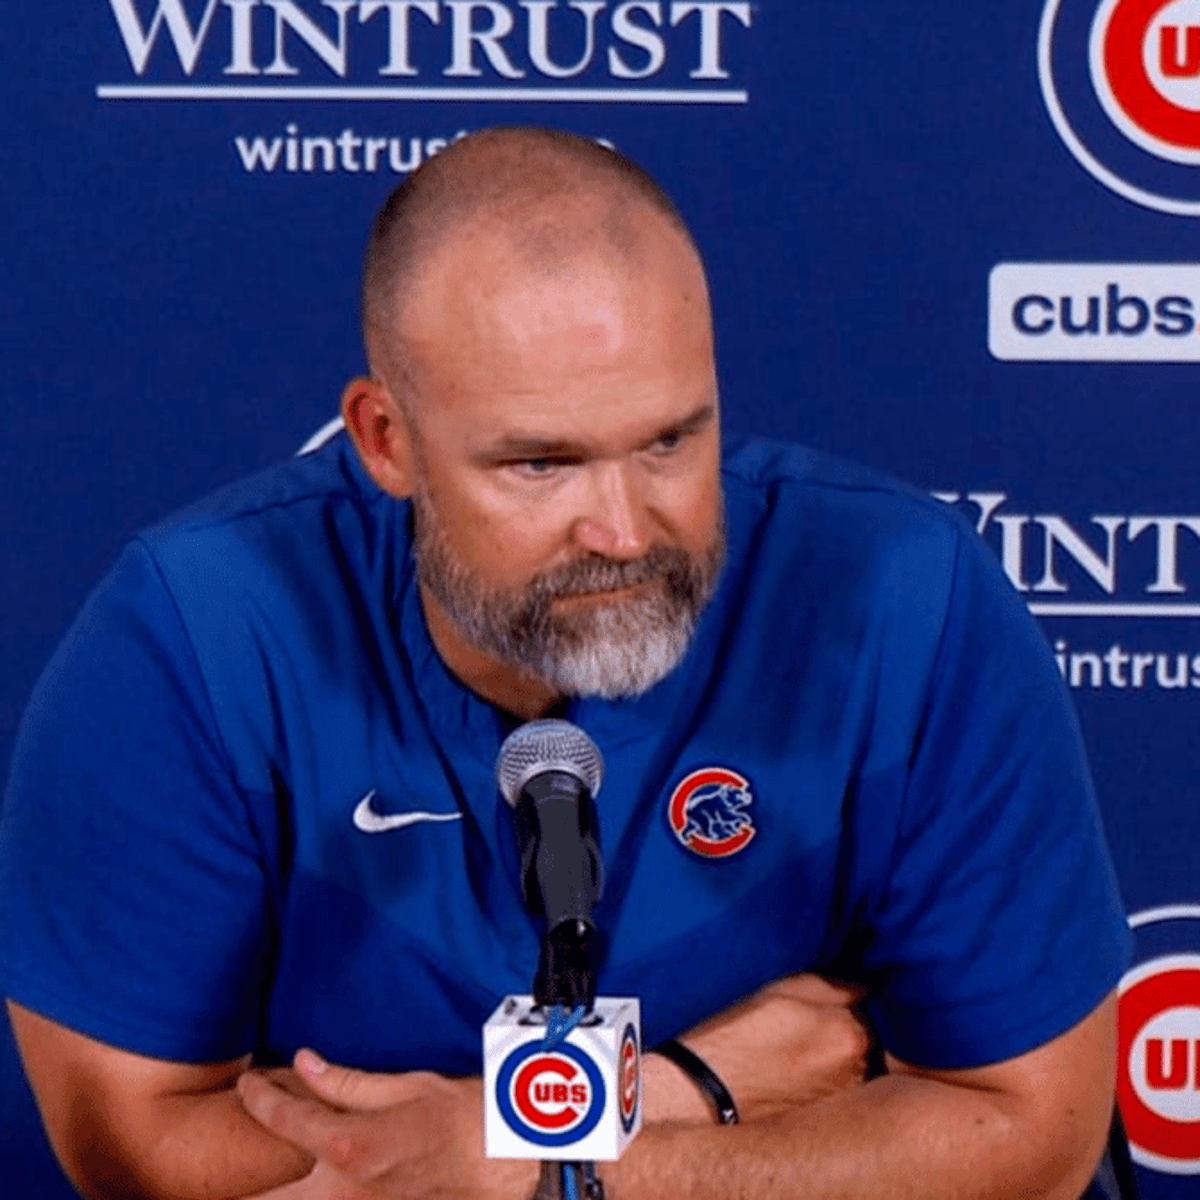 Twitter Calls For It So Is It Time For The Cubs To Fire David Ross